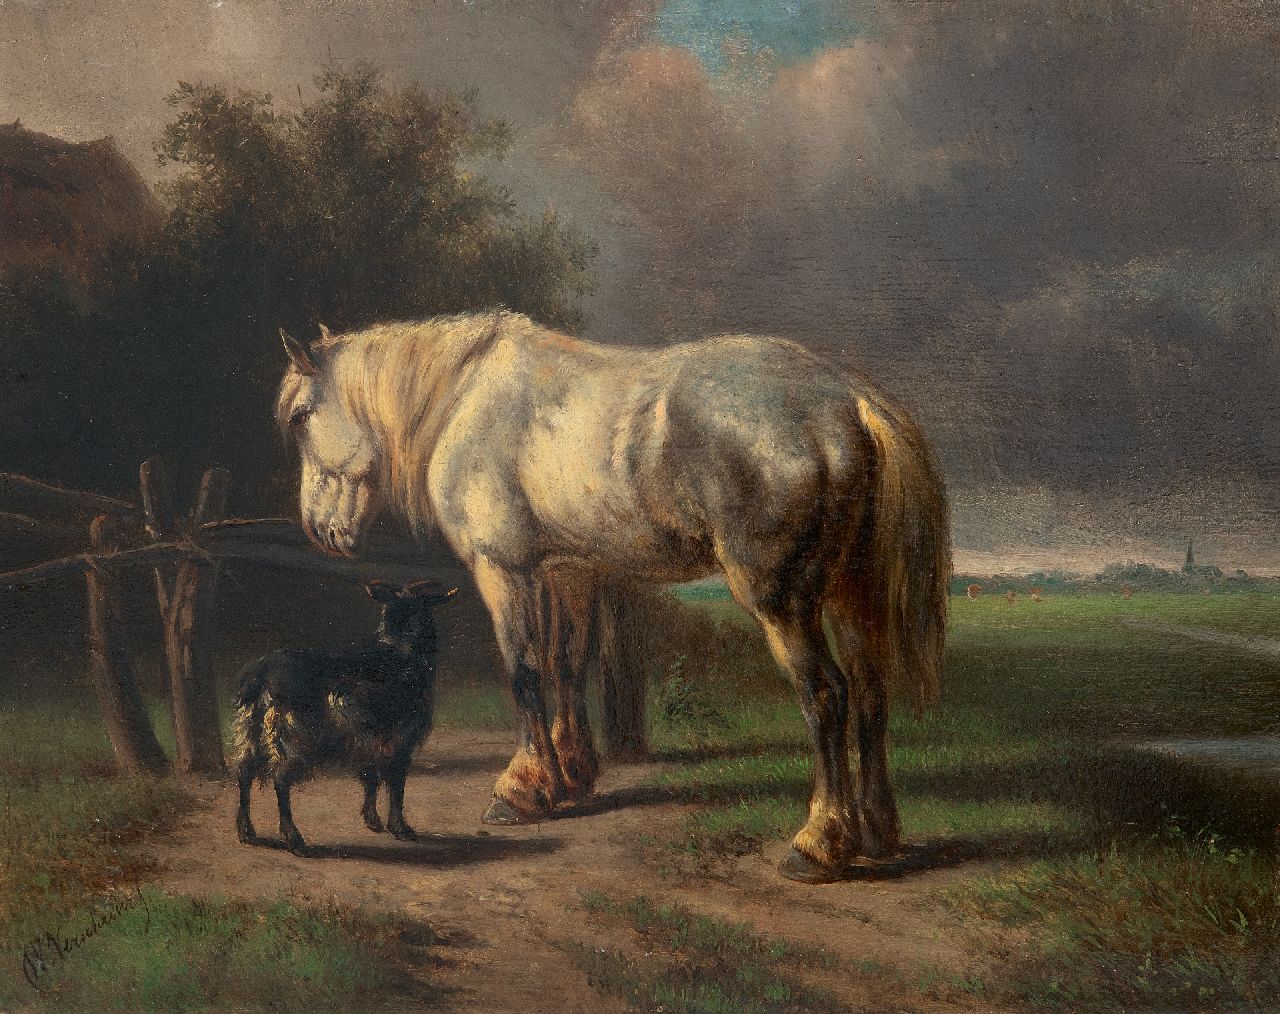 Verschuur W.  | Wouterus Verschuur, Horse and goat near a fence, oil on panel 23.0 x 29.2 cm, signed l.l.